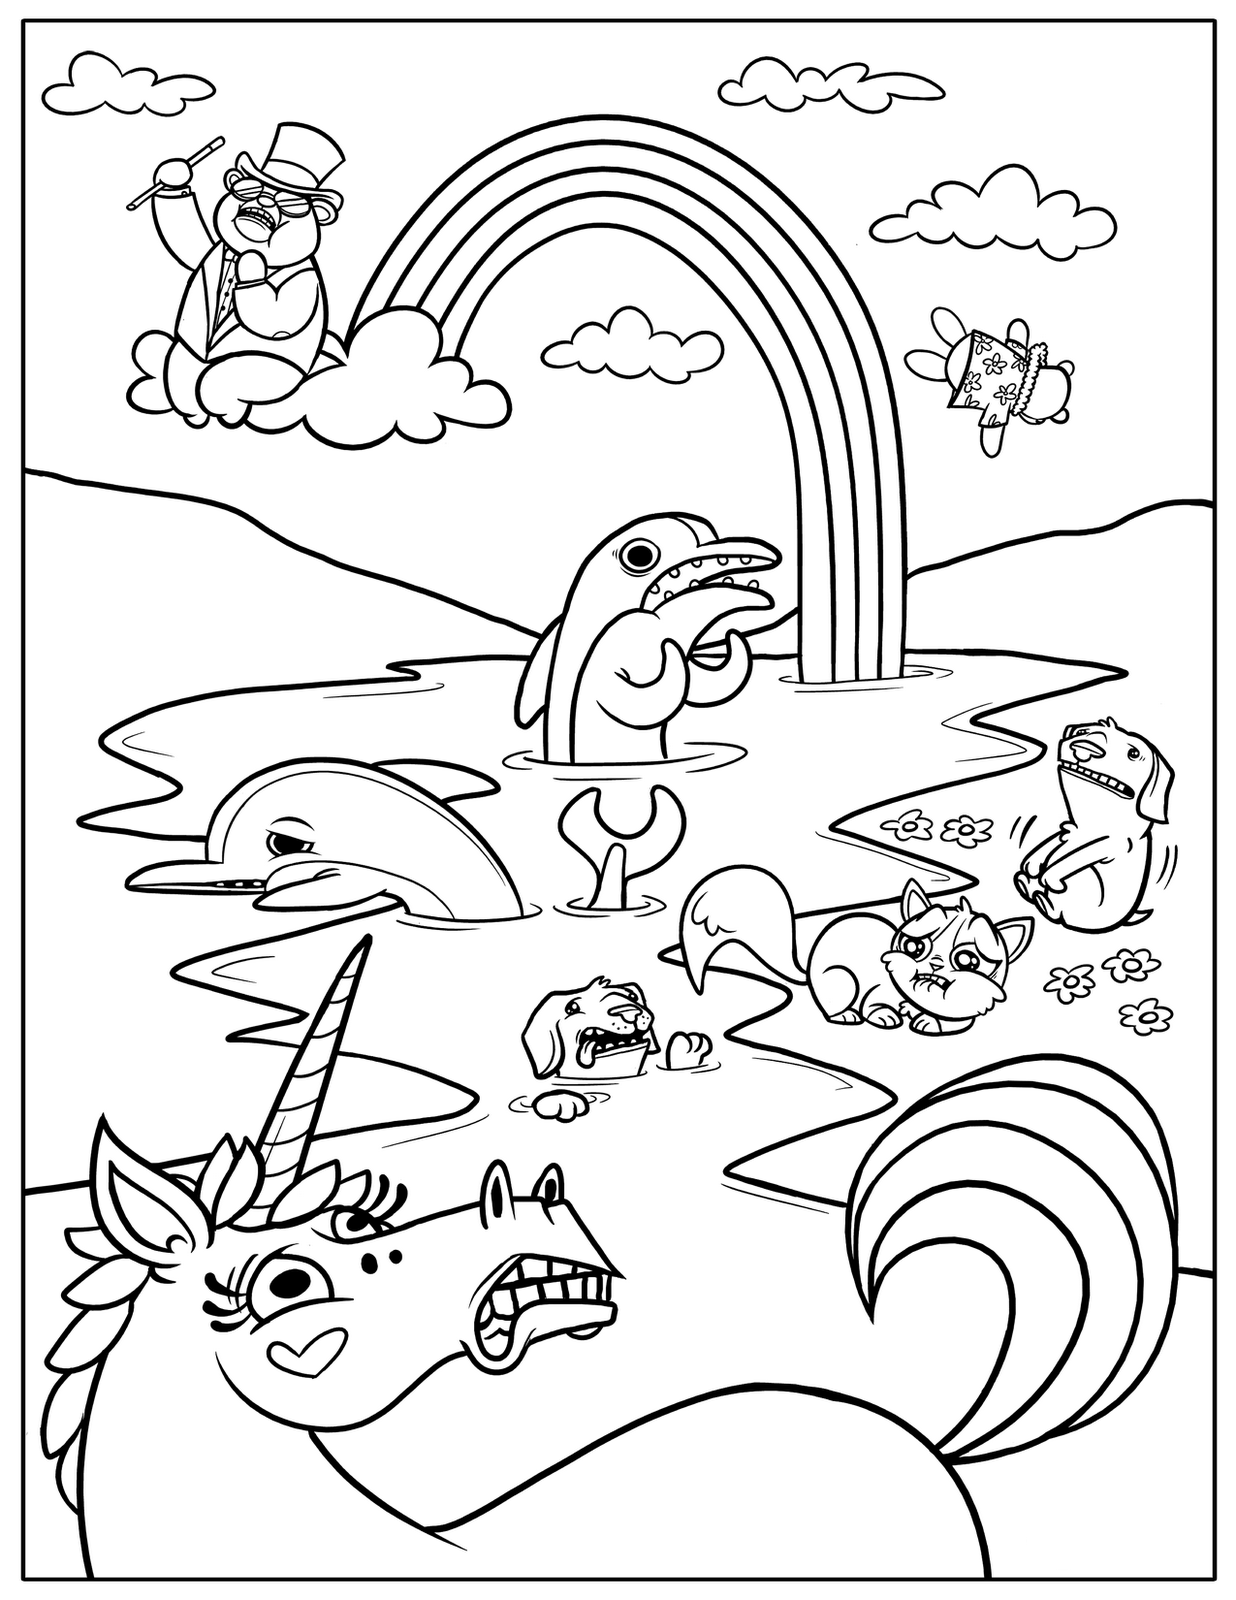 25-new-free-printable-coloring-pages-for-kids